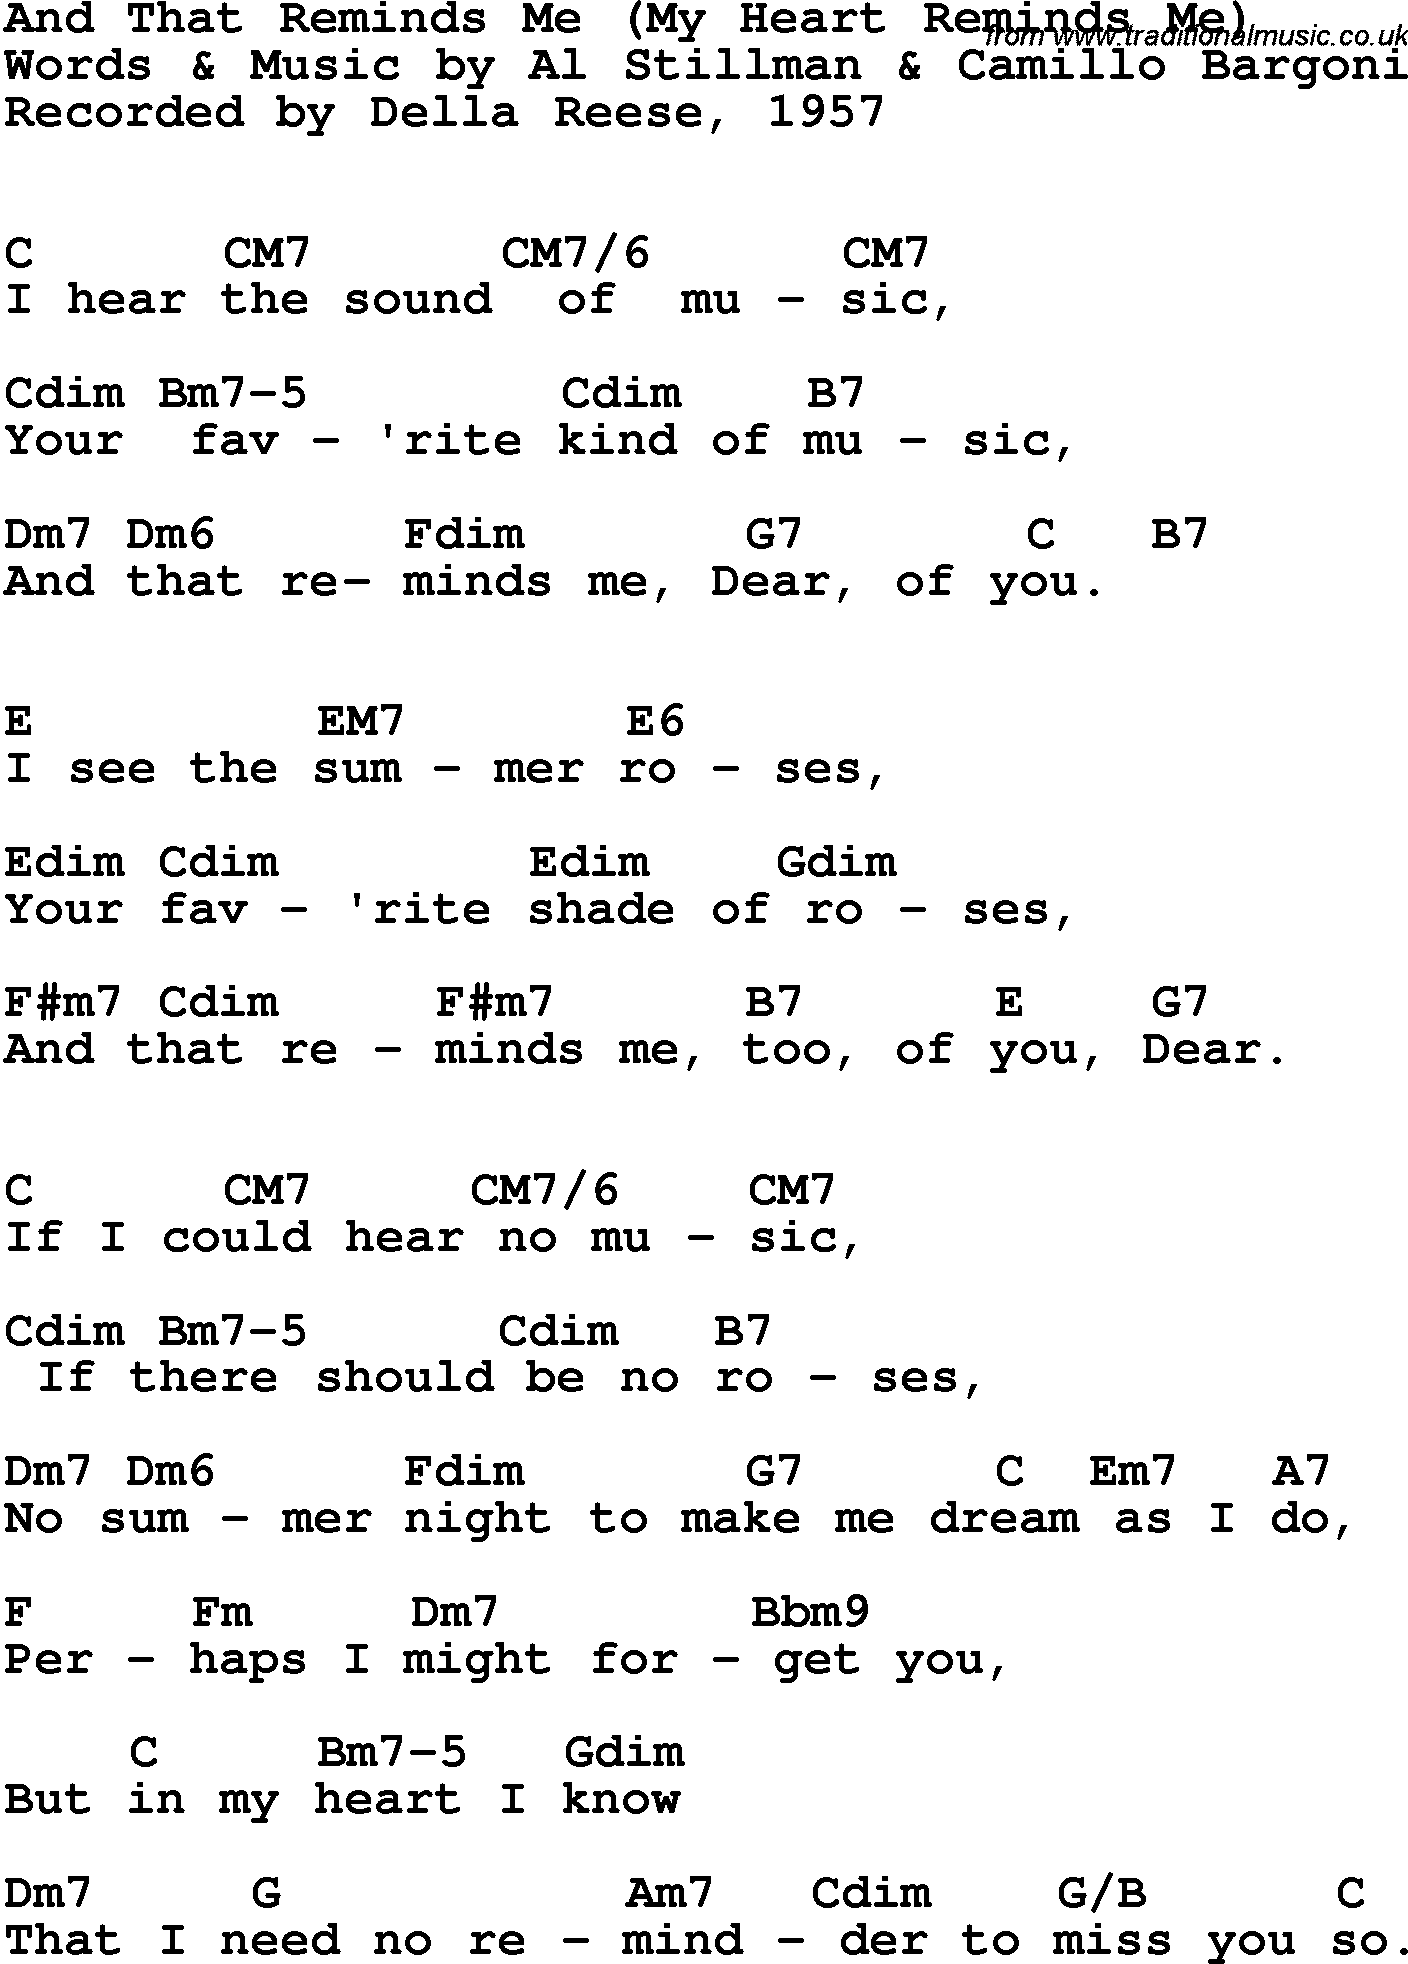 Song Lyrics with guitar chords for And That Reminds Me - Della Reese, 1957